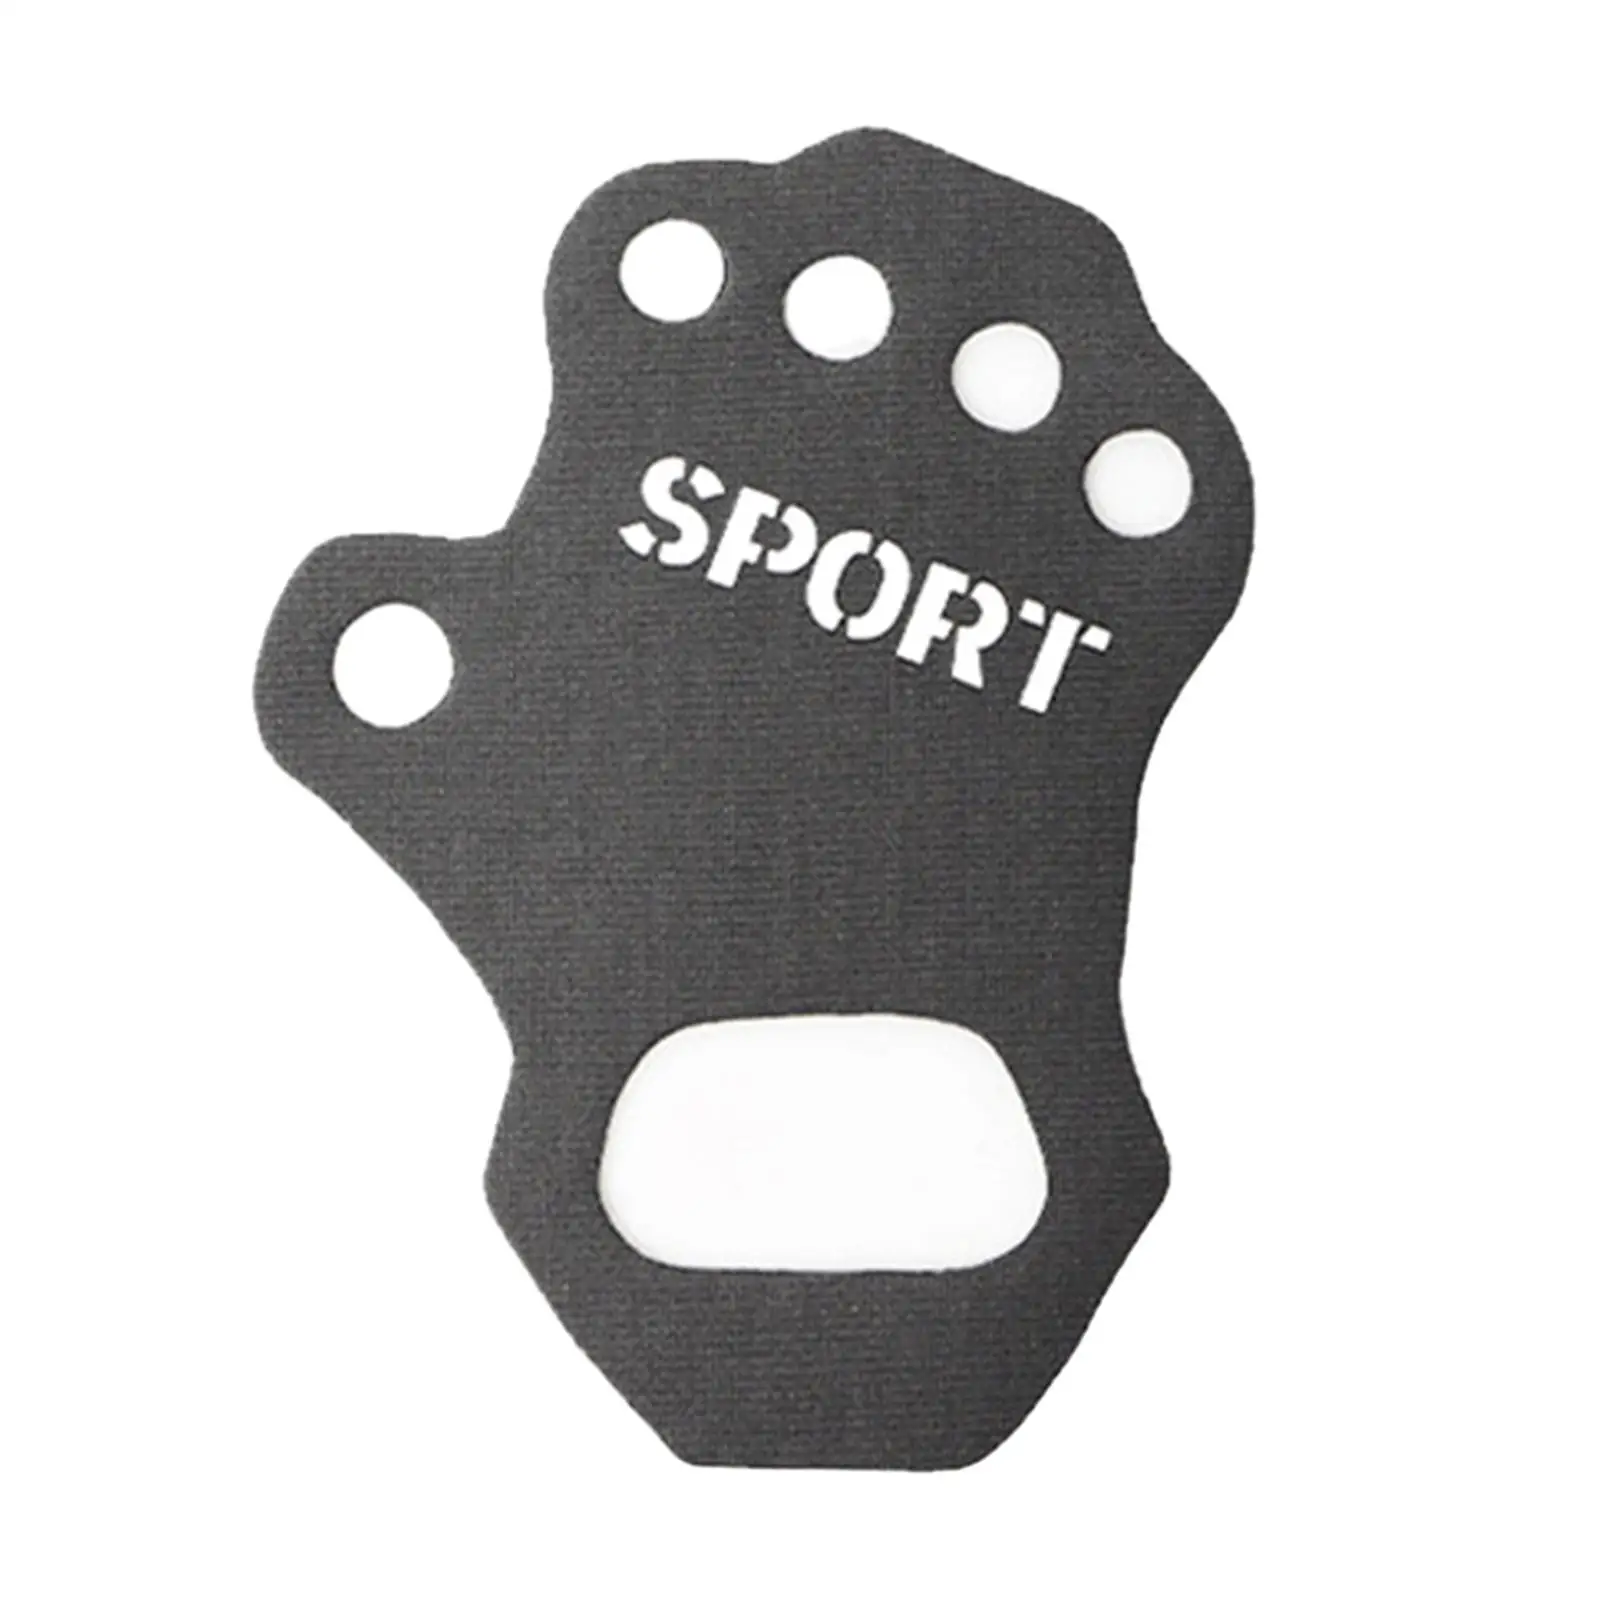 Weight Lifting Glove Palm Protect Full Palm Protection Exercise Grip Pad for Powerlifting Fitness Cycling Hanging Training